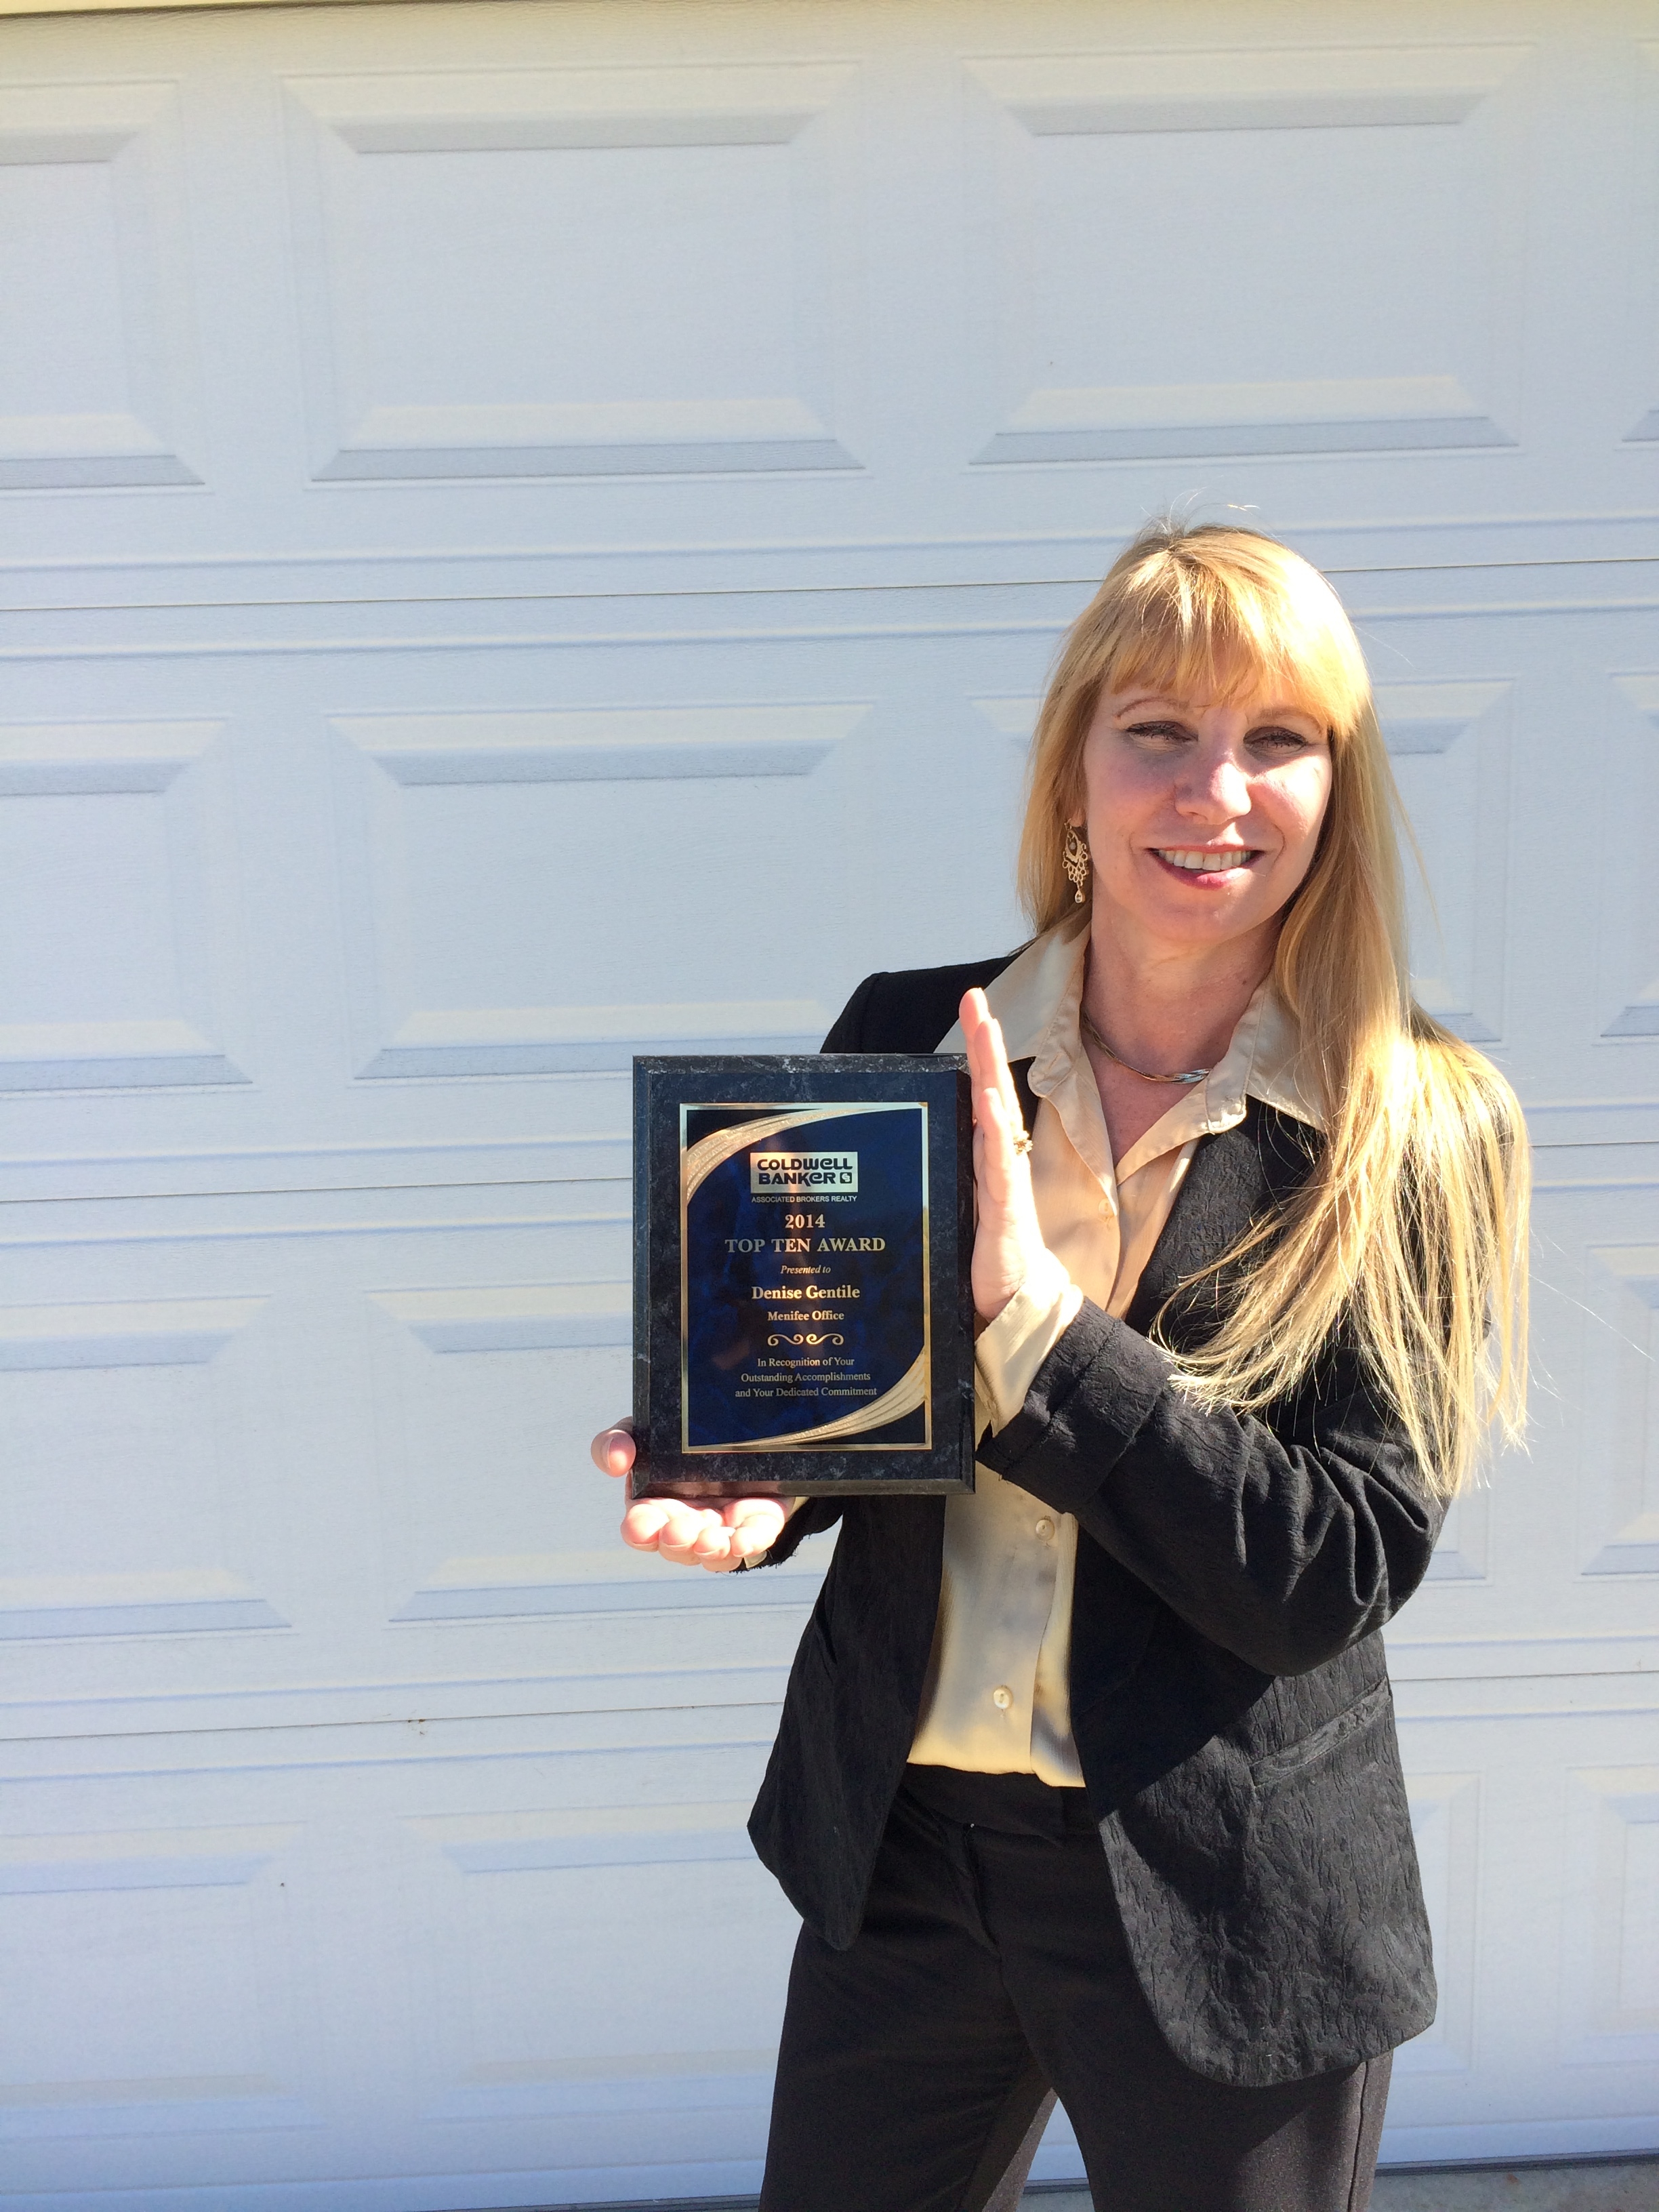 Coldwell Banker ABR - 2014 Office Top 10 award